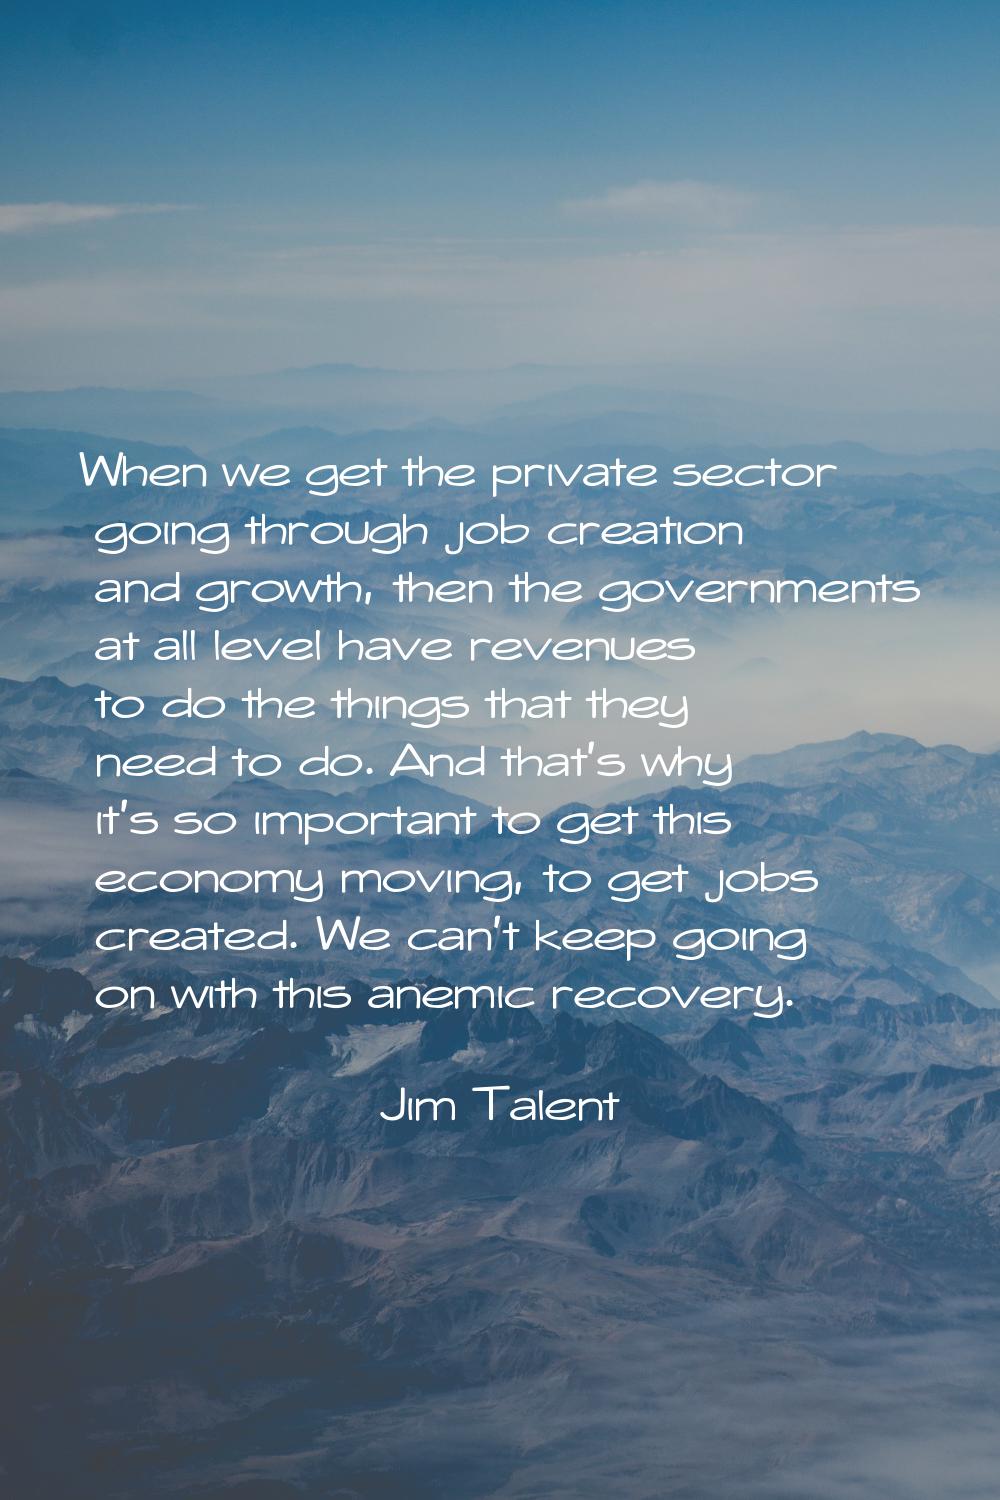 When we get the private sector going through job creation and growth, then the governments at all l